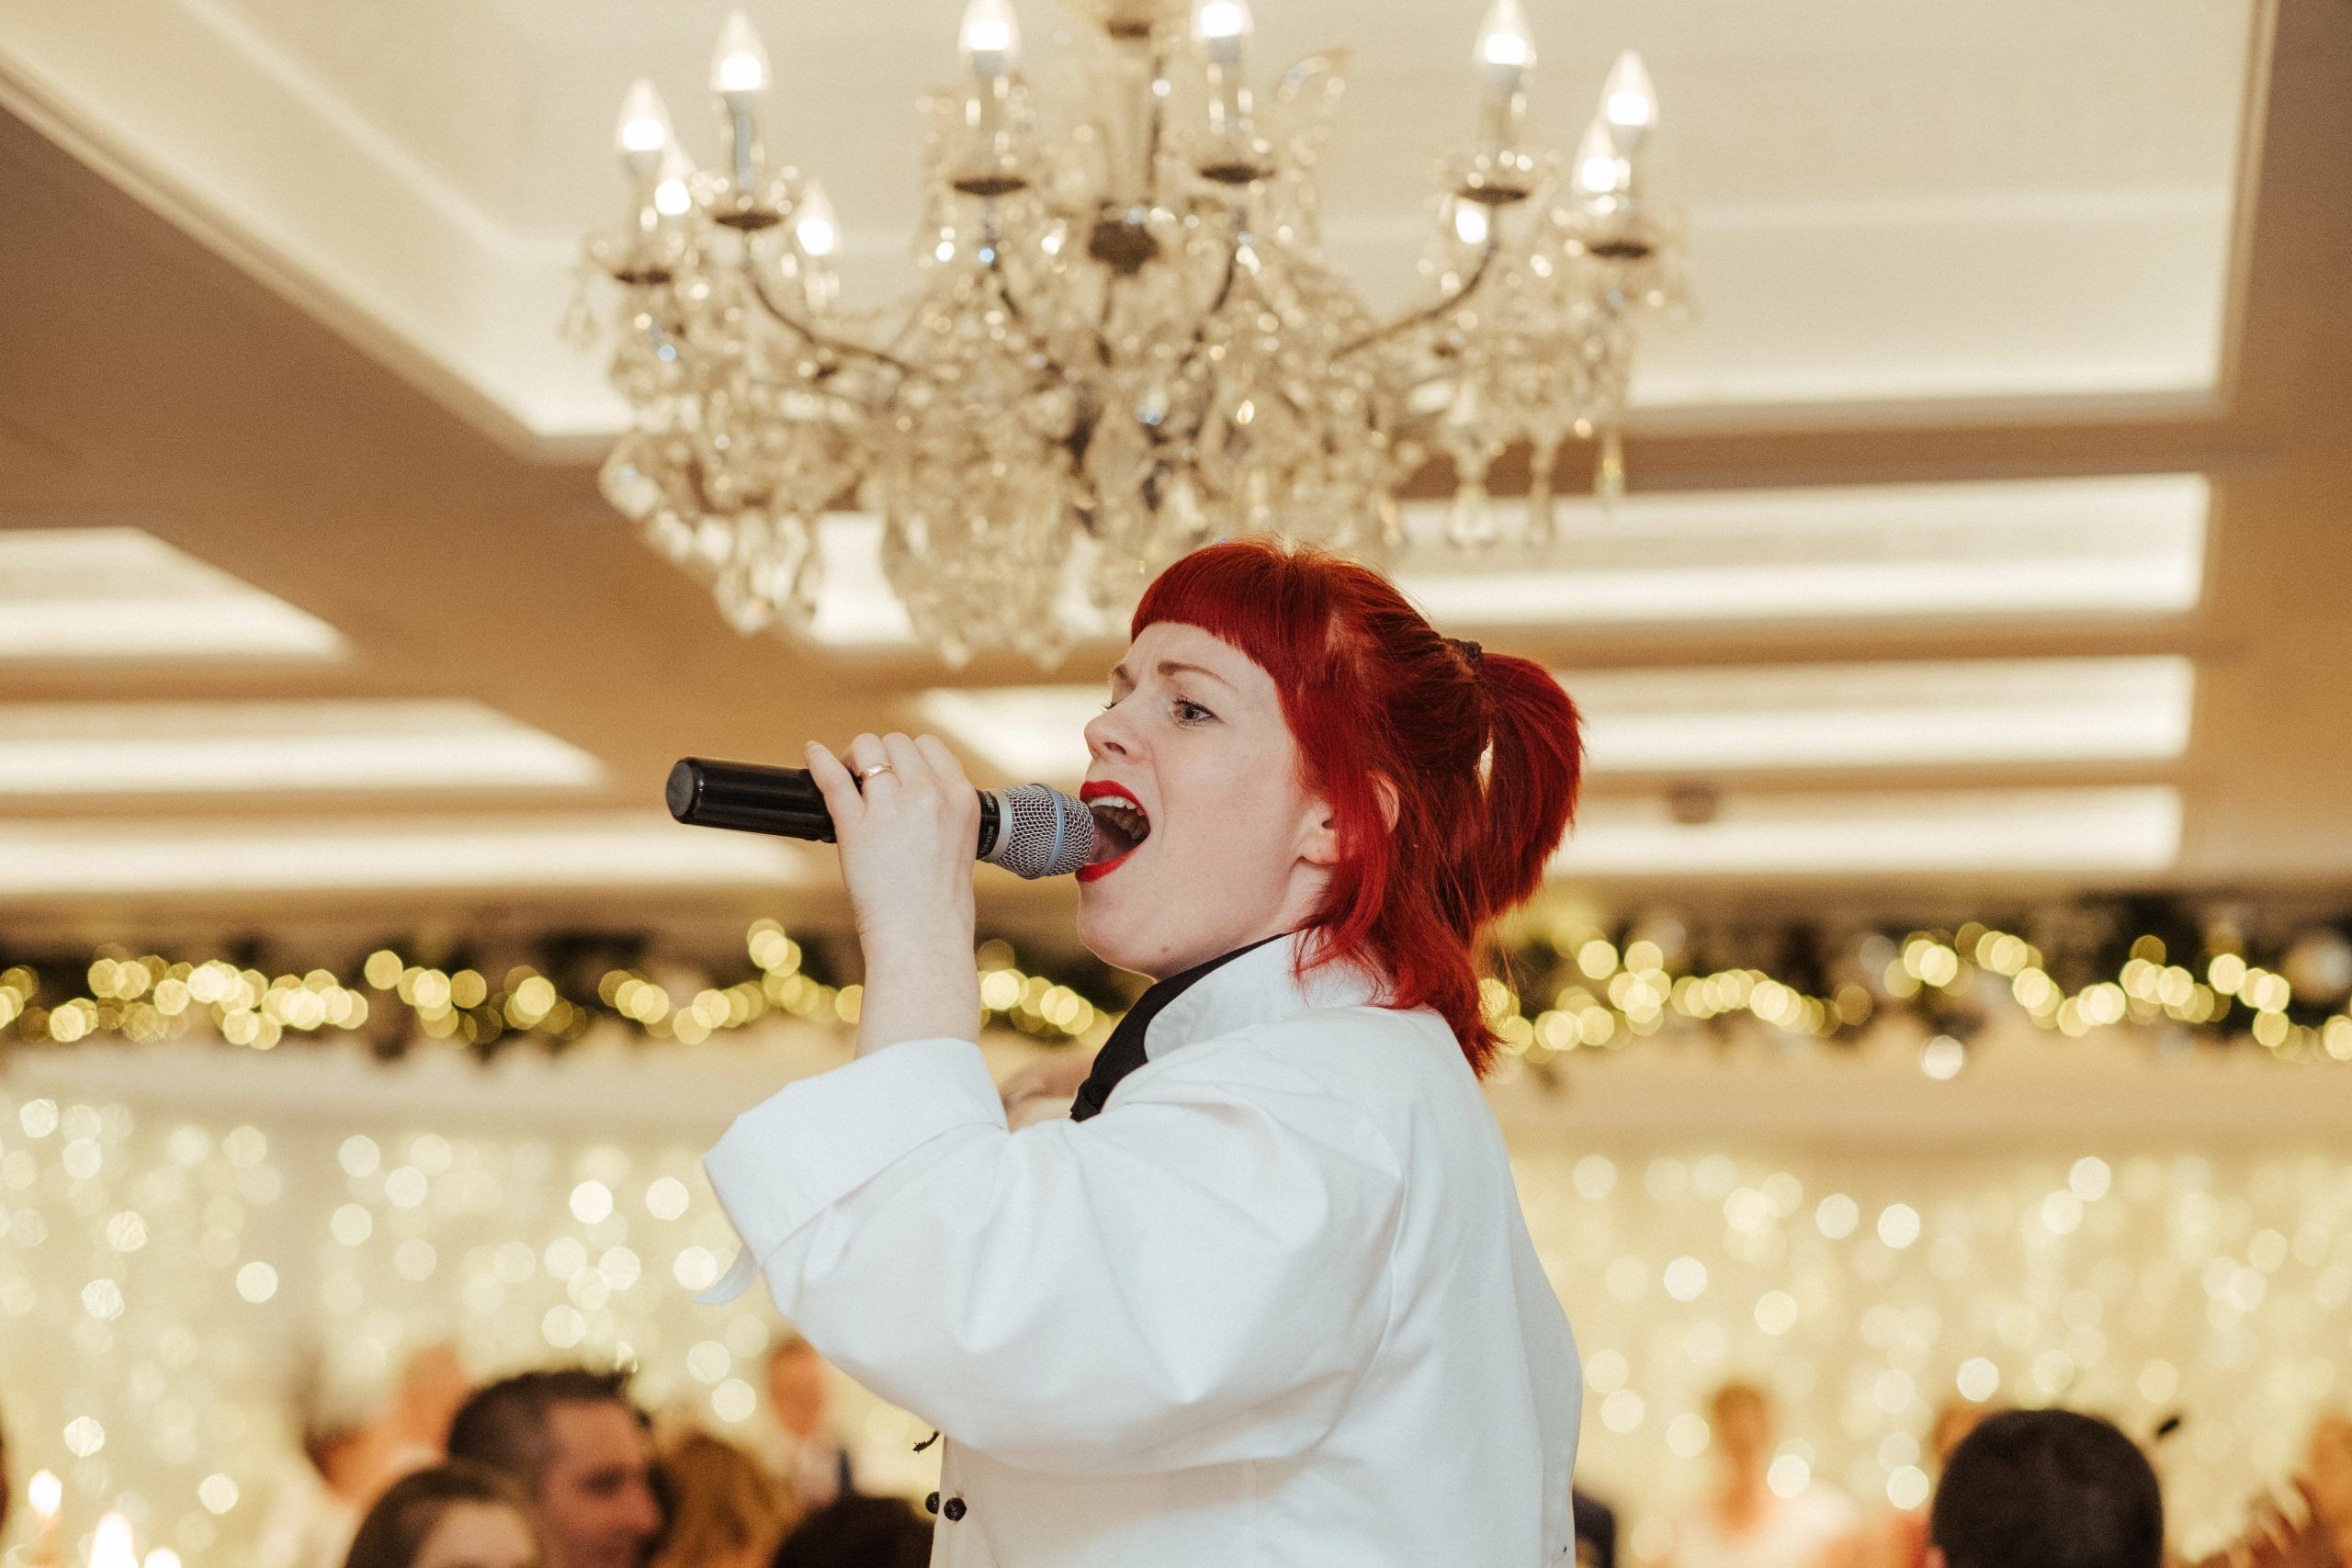 singers for hire singing chef